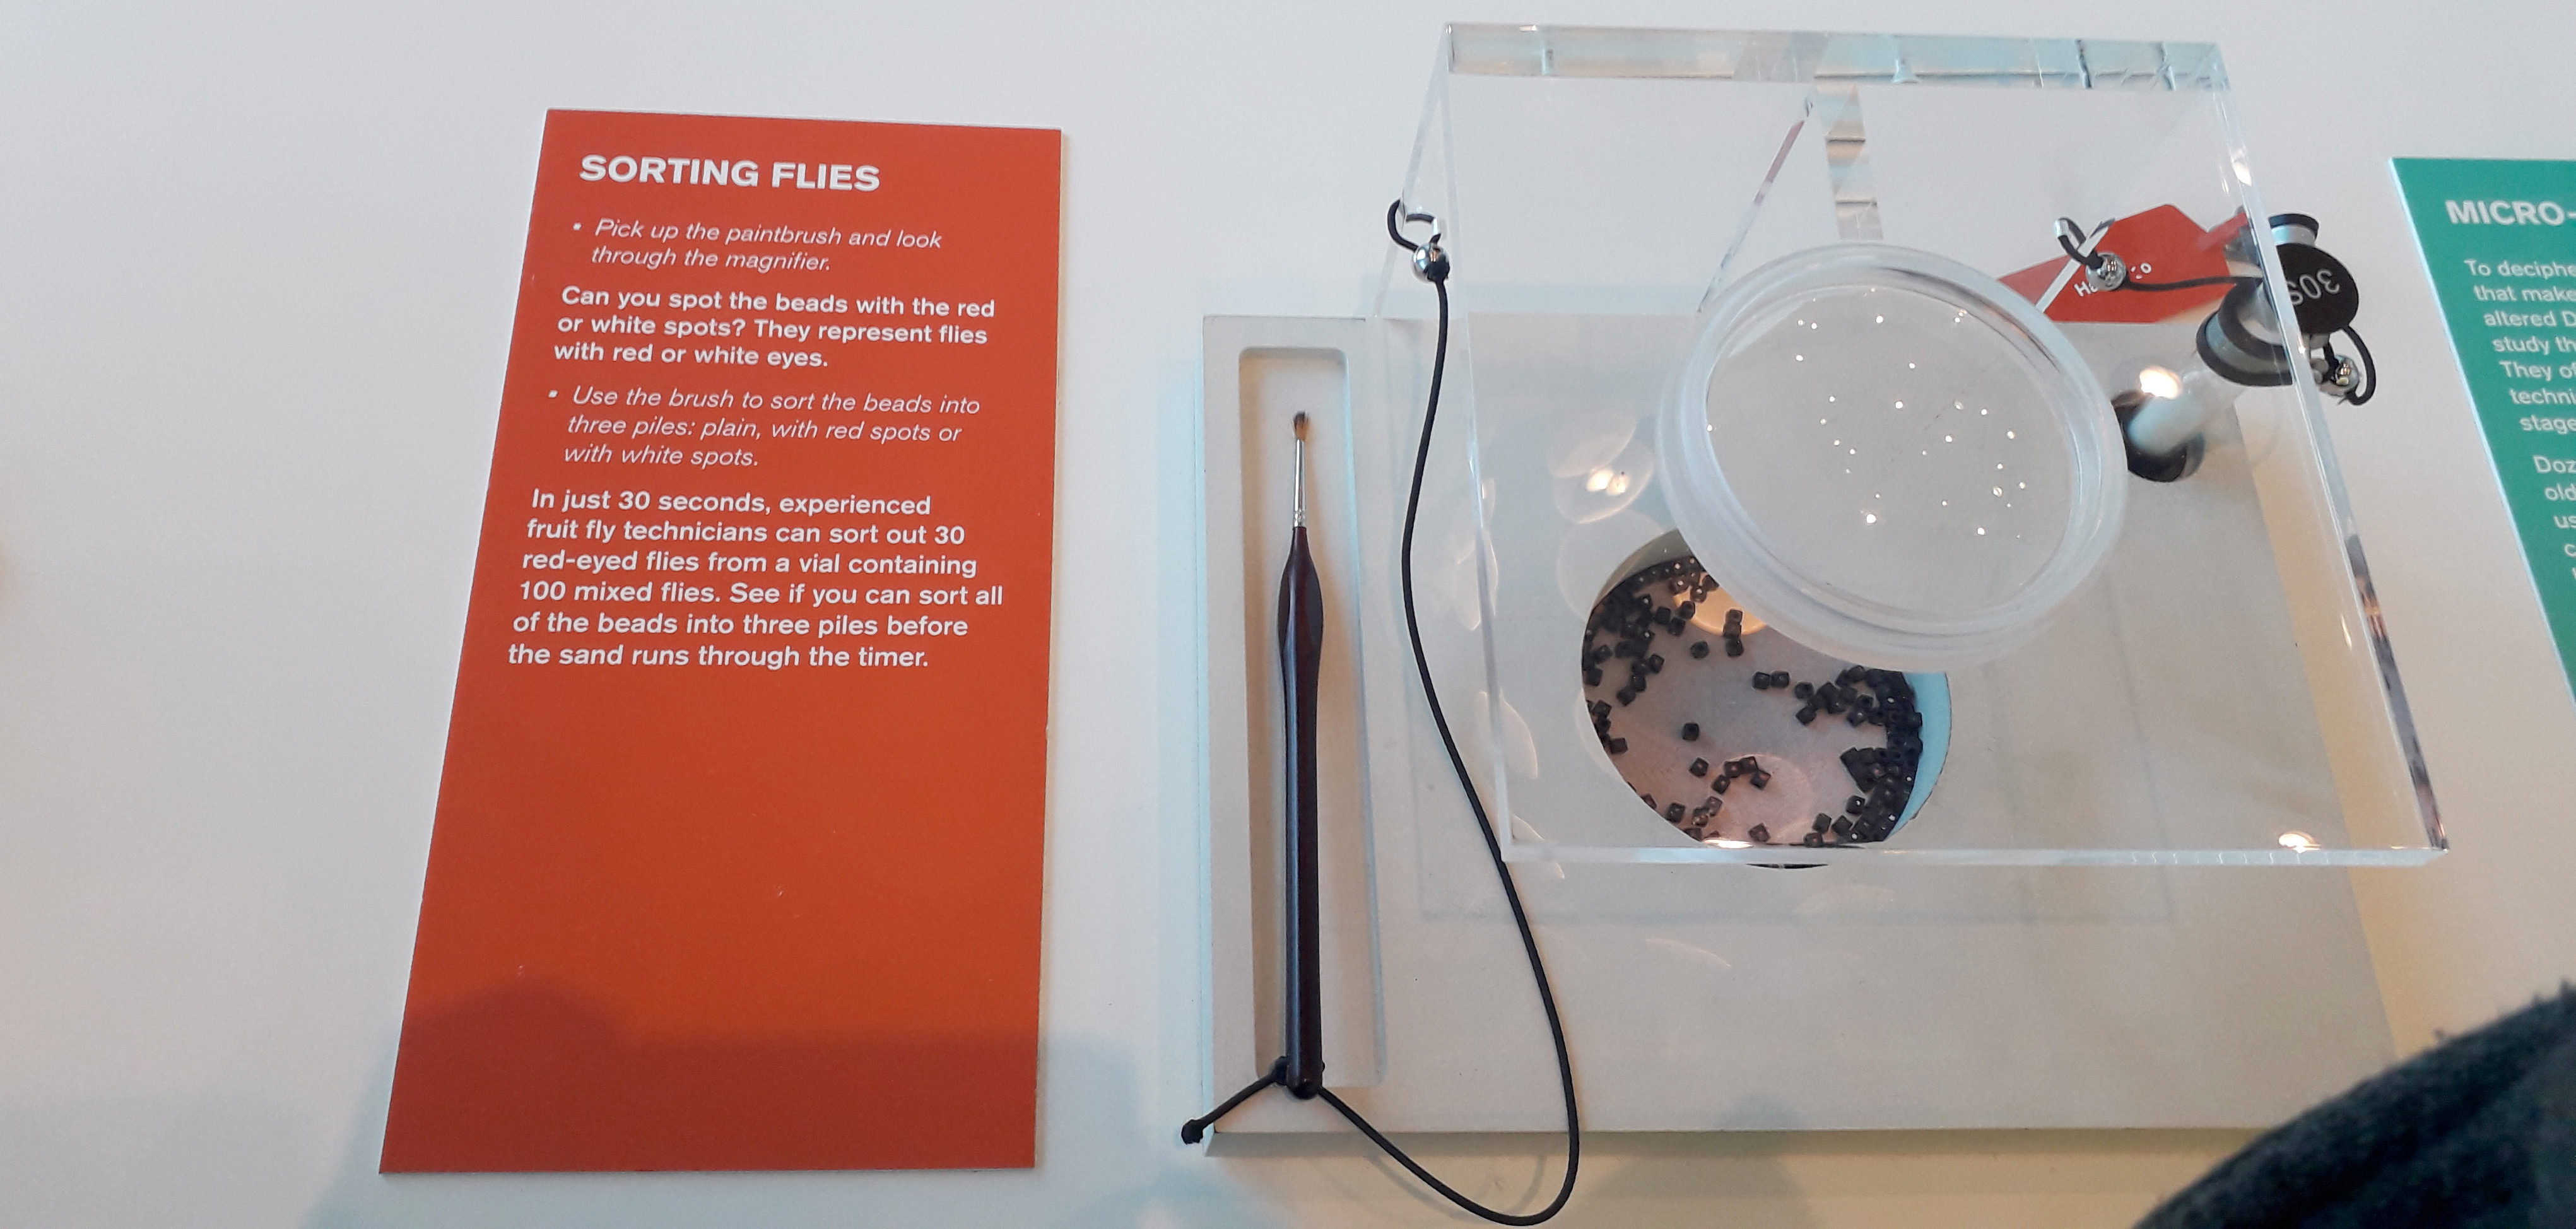 A hands-on activity at the Craft and Graft exhibition, inviting visitors to try one of the tasks carried out by fly technicians: separating plastic "flies" using a small paintbrush and a magnifying glass.